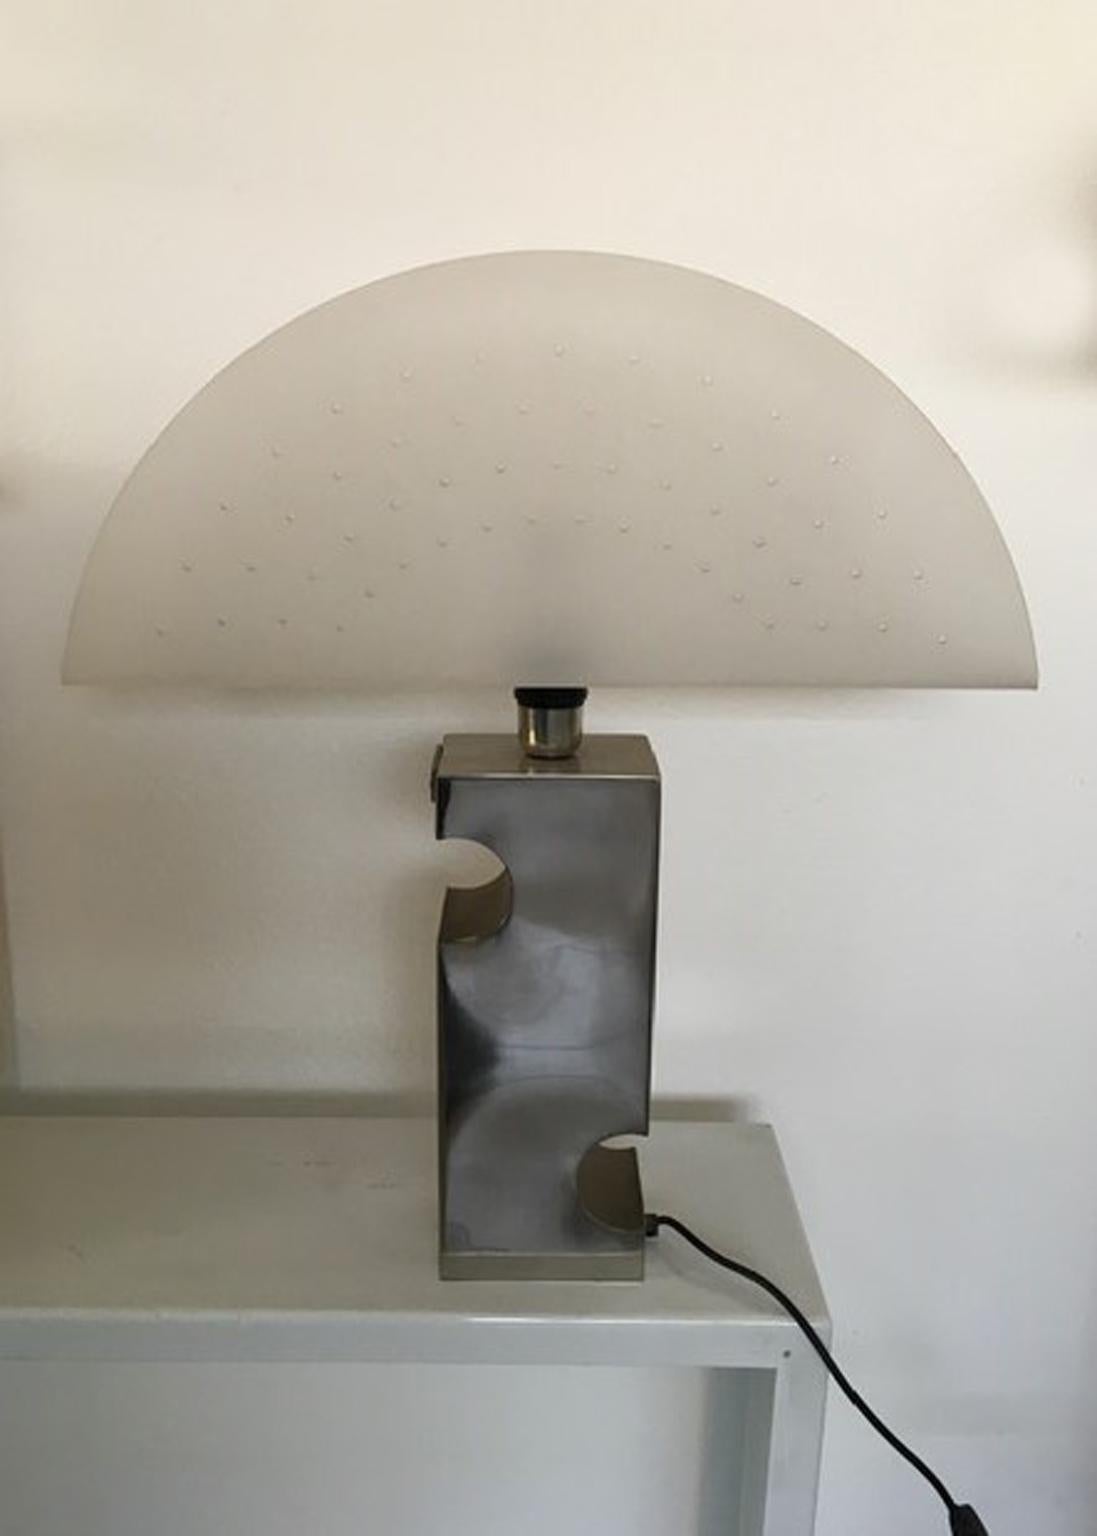 This beautiful table lamp is a unique piece products in the 1970 by an Italian factory. It is a prototype of a collection never produced by Sealine and designed by the Italian artist Edmondo Cirillo.
The piece is entirely Italian hand made.
Original